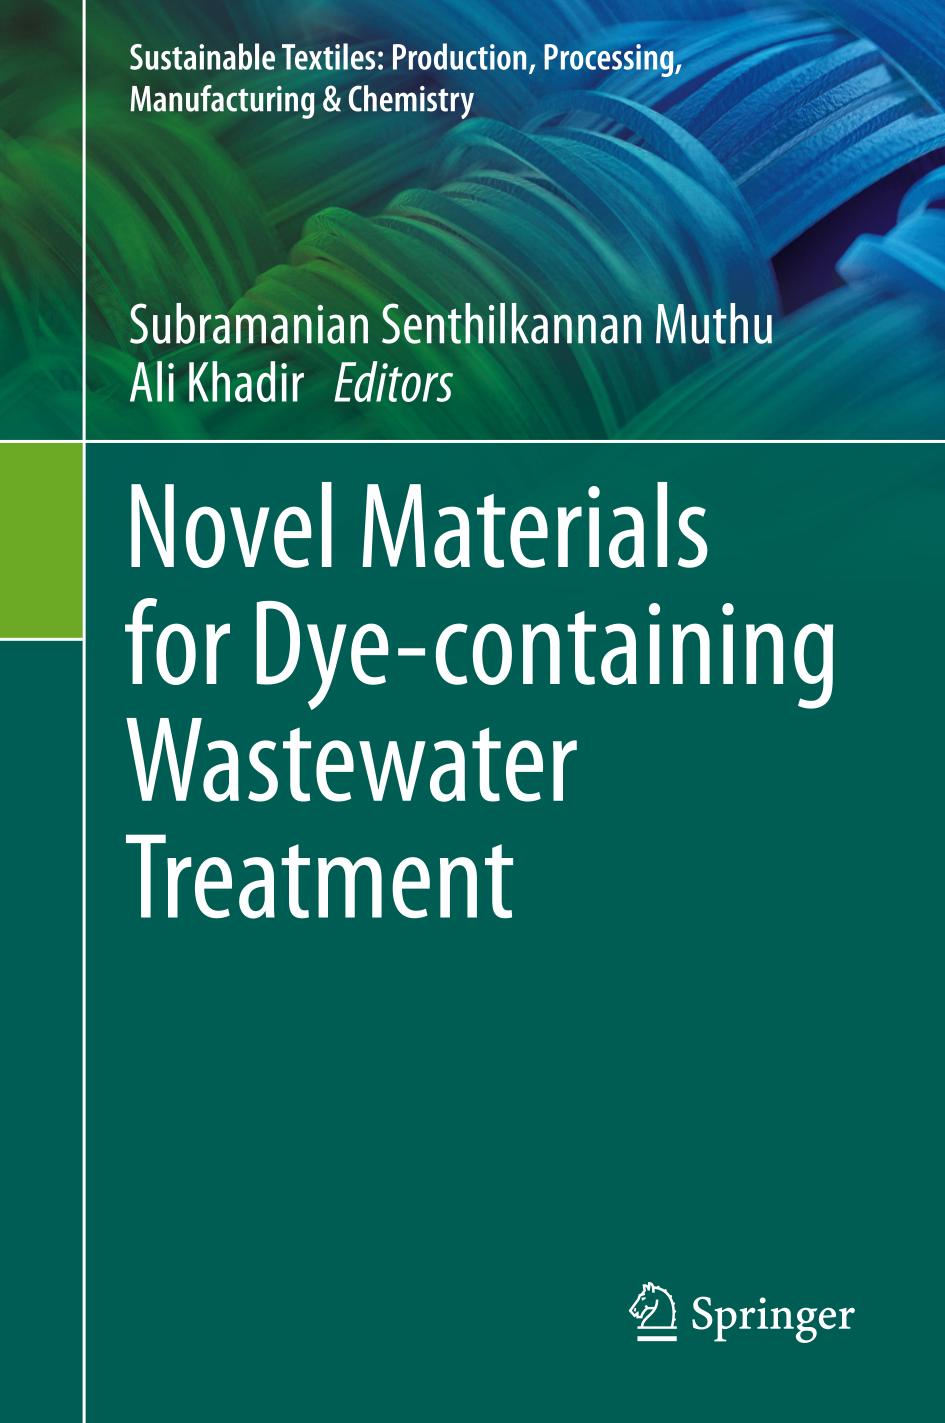 Novel materials for dye-containing wastewater treatment